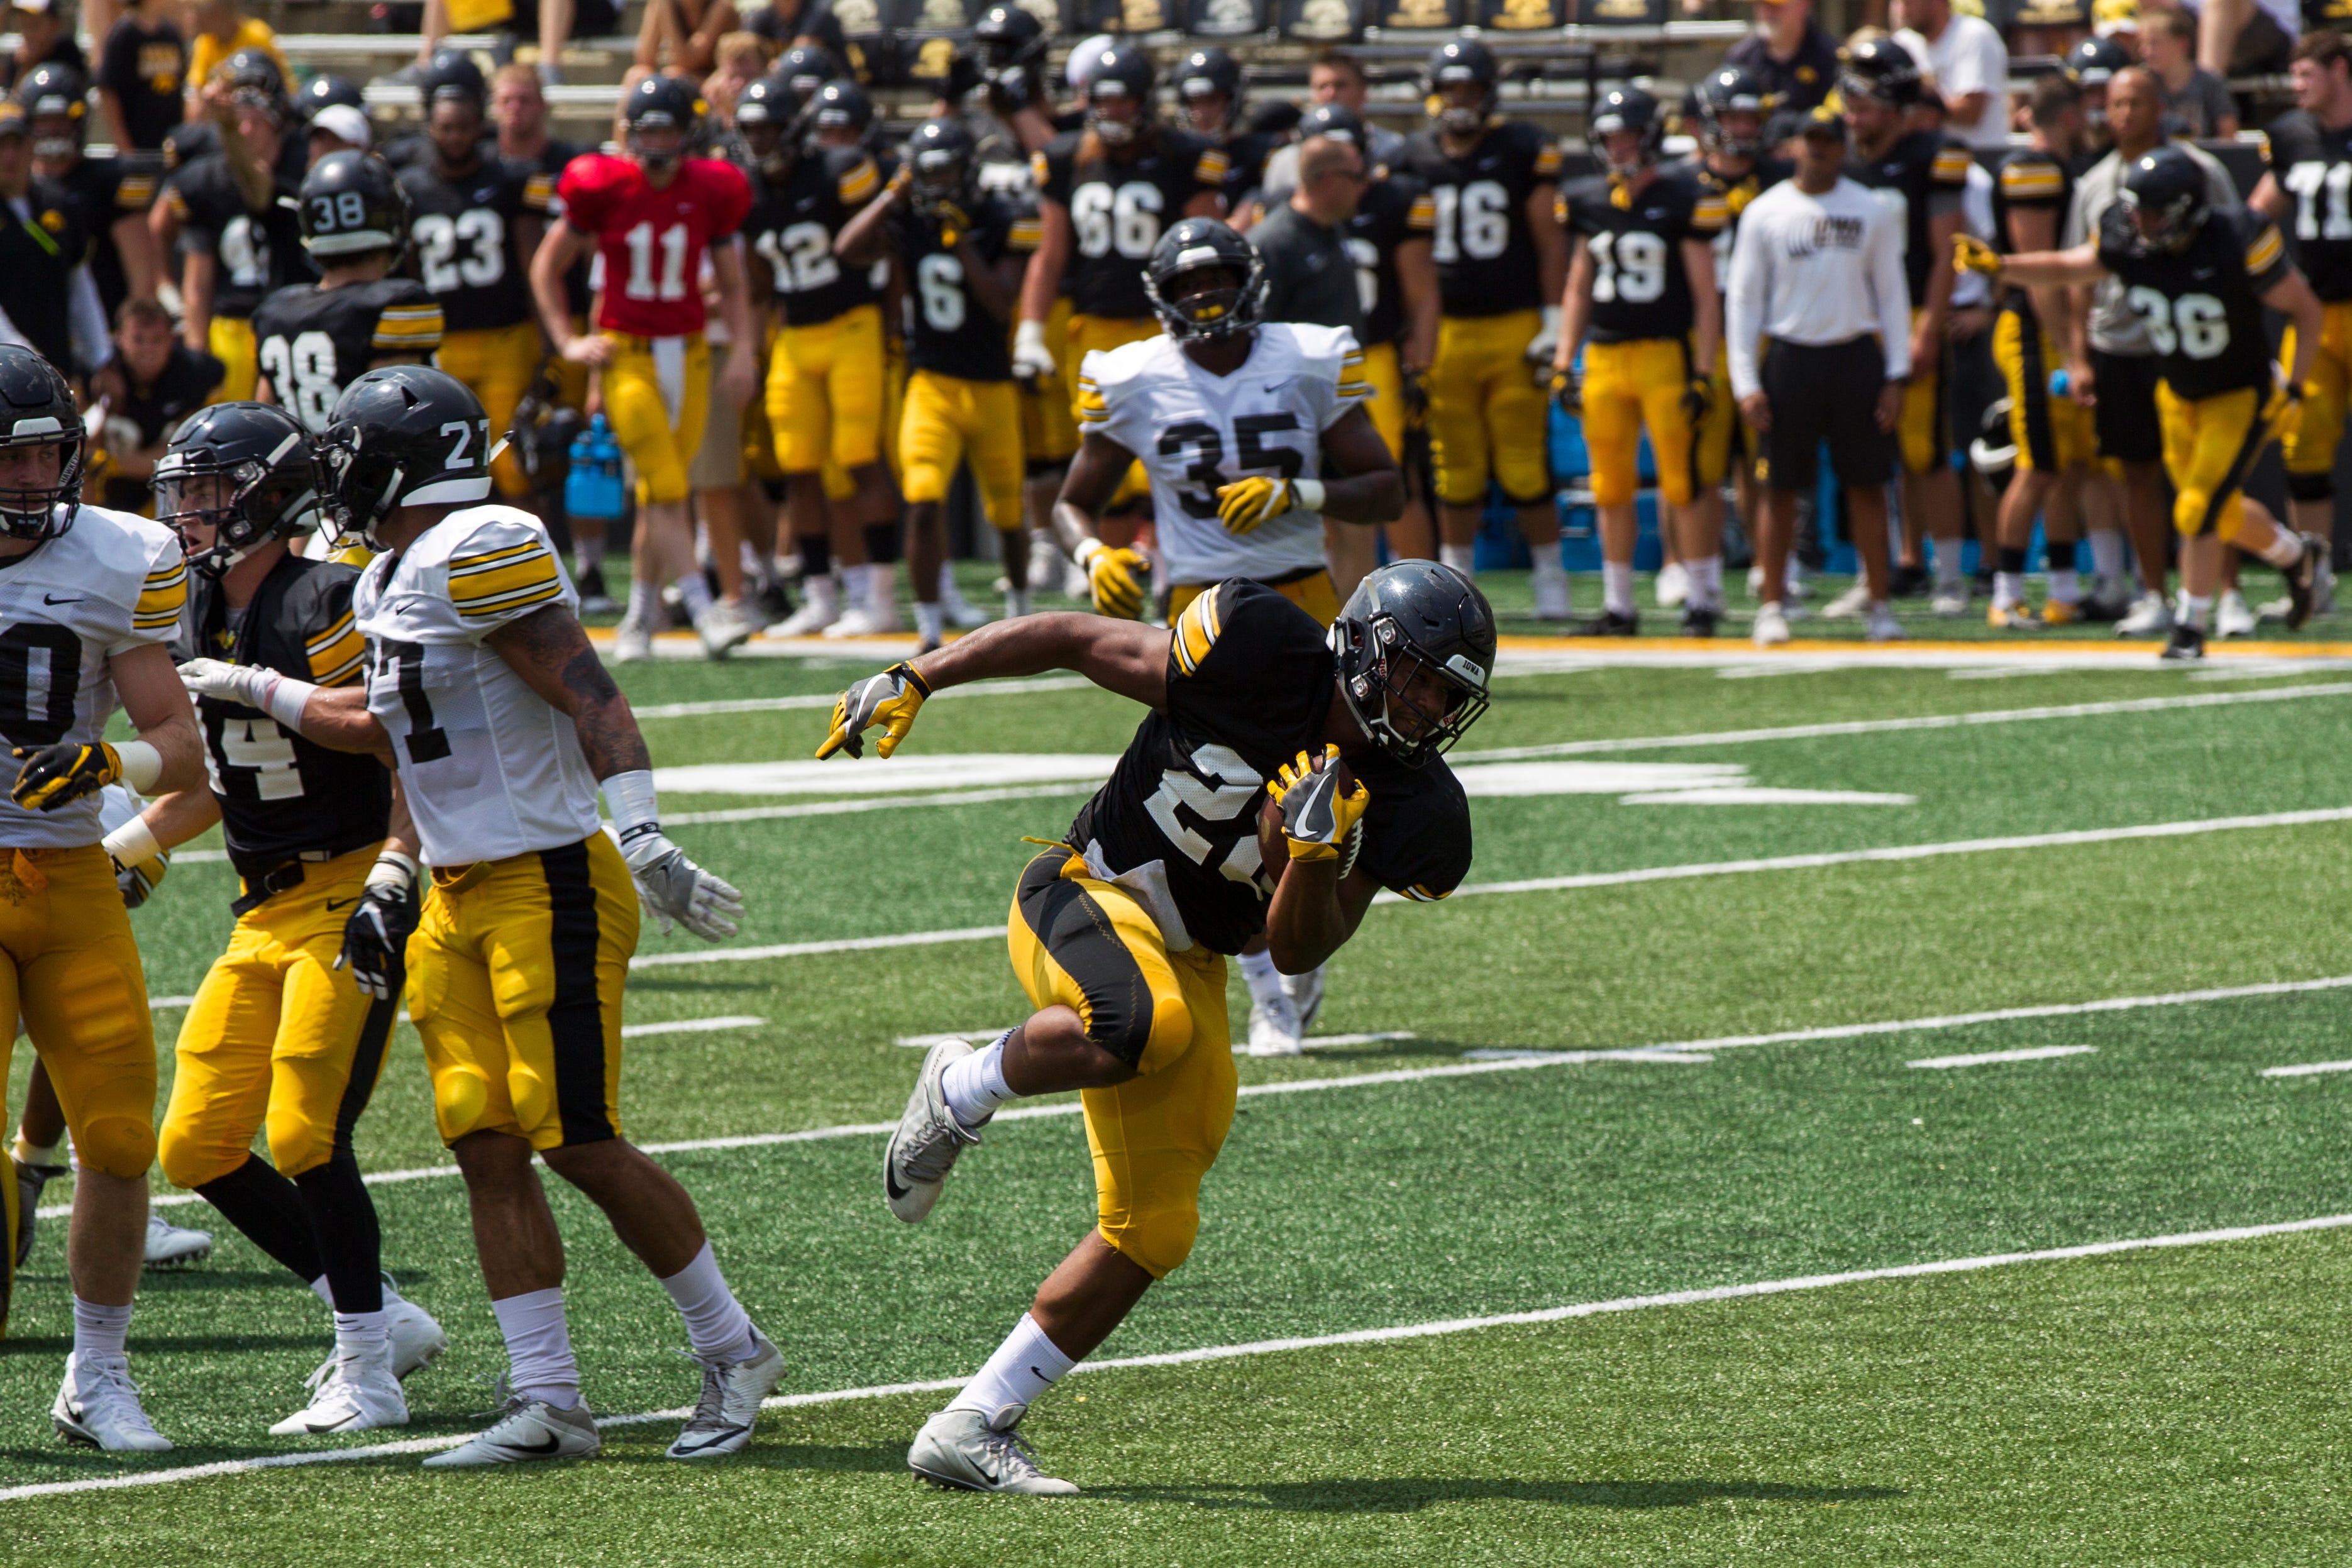 Iowa running back Toren Young sheds a tackle during a Kids Day practice on Saturday, Aug. 11, 2018, at Kinnick Stadium in Iowa City.